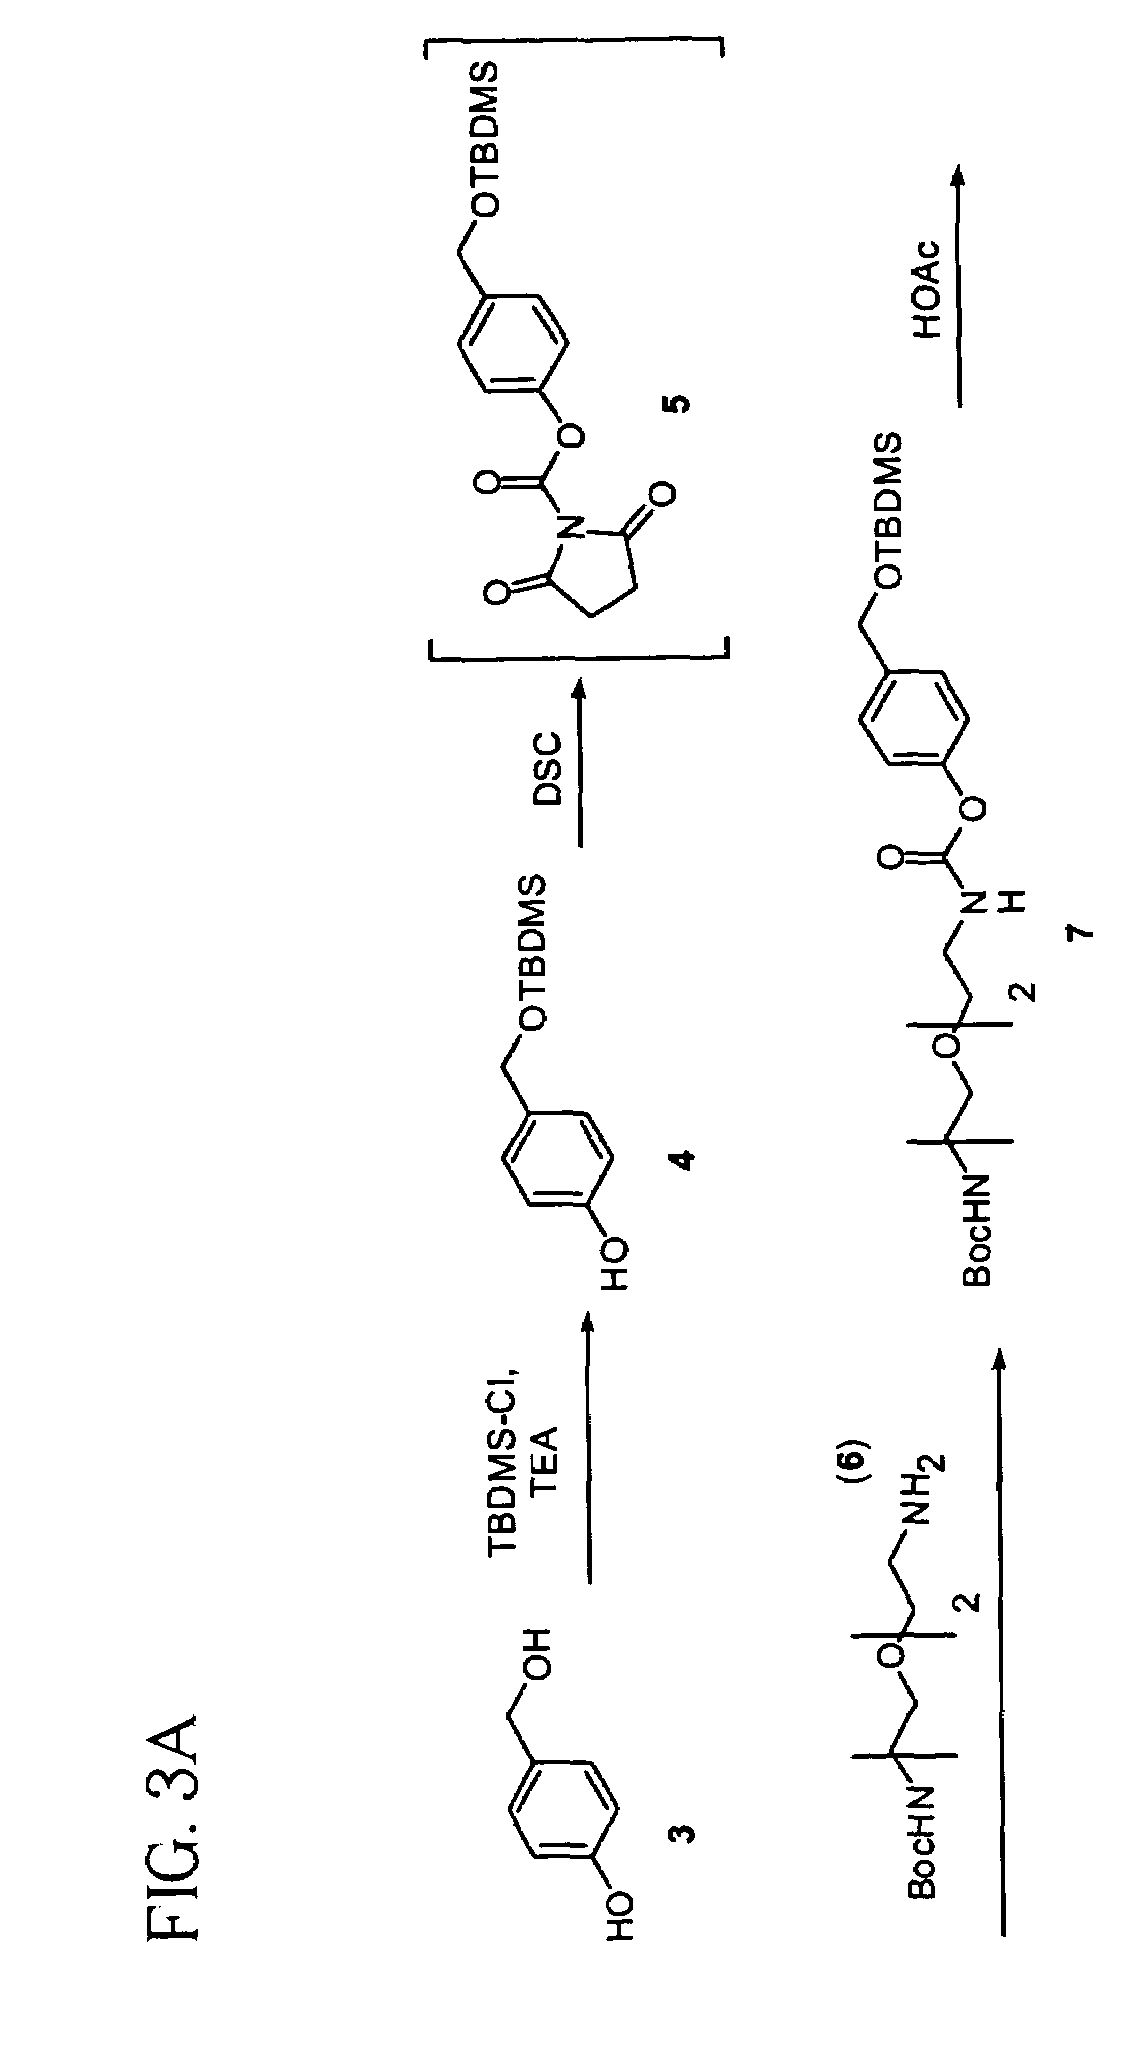 Polymeric thiol-linked prodrugs employing benzyl elimination systems